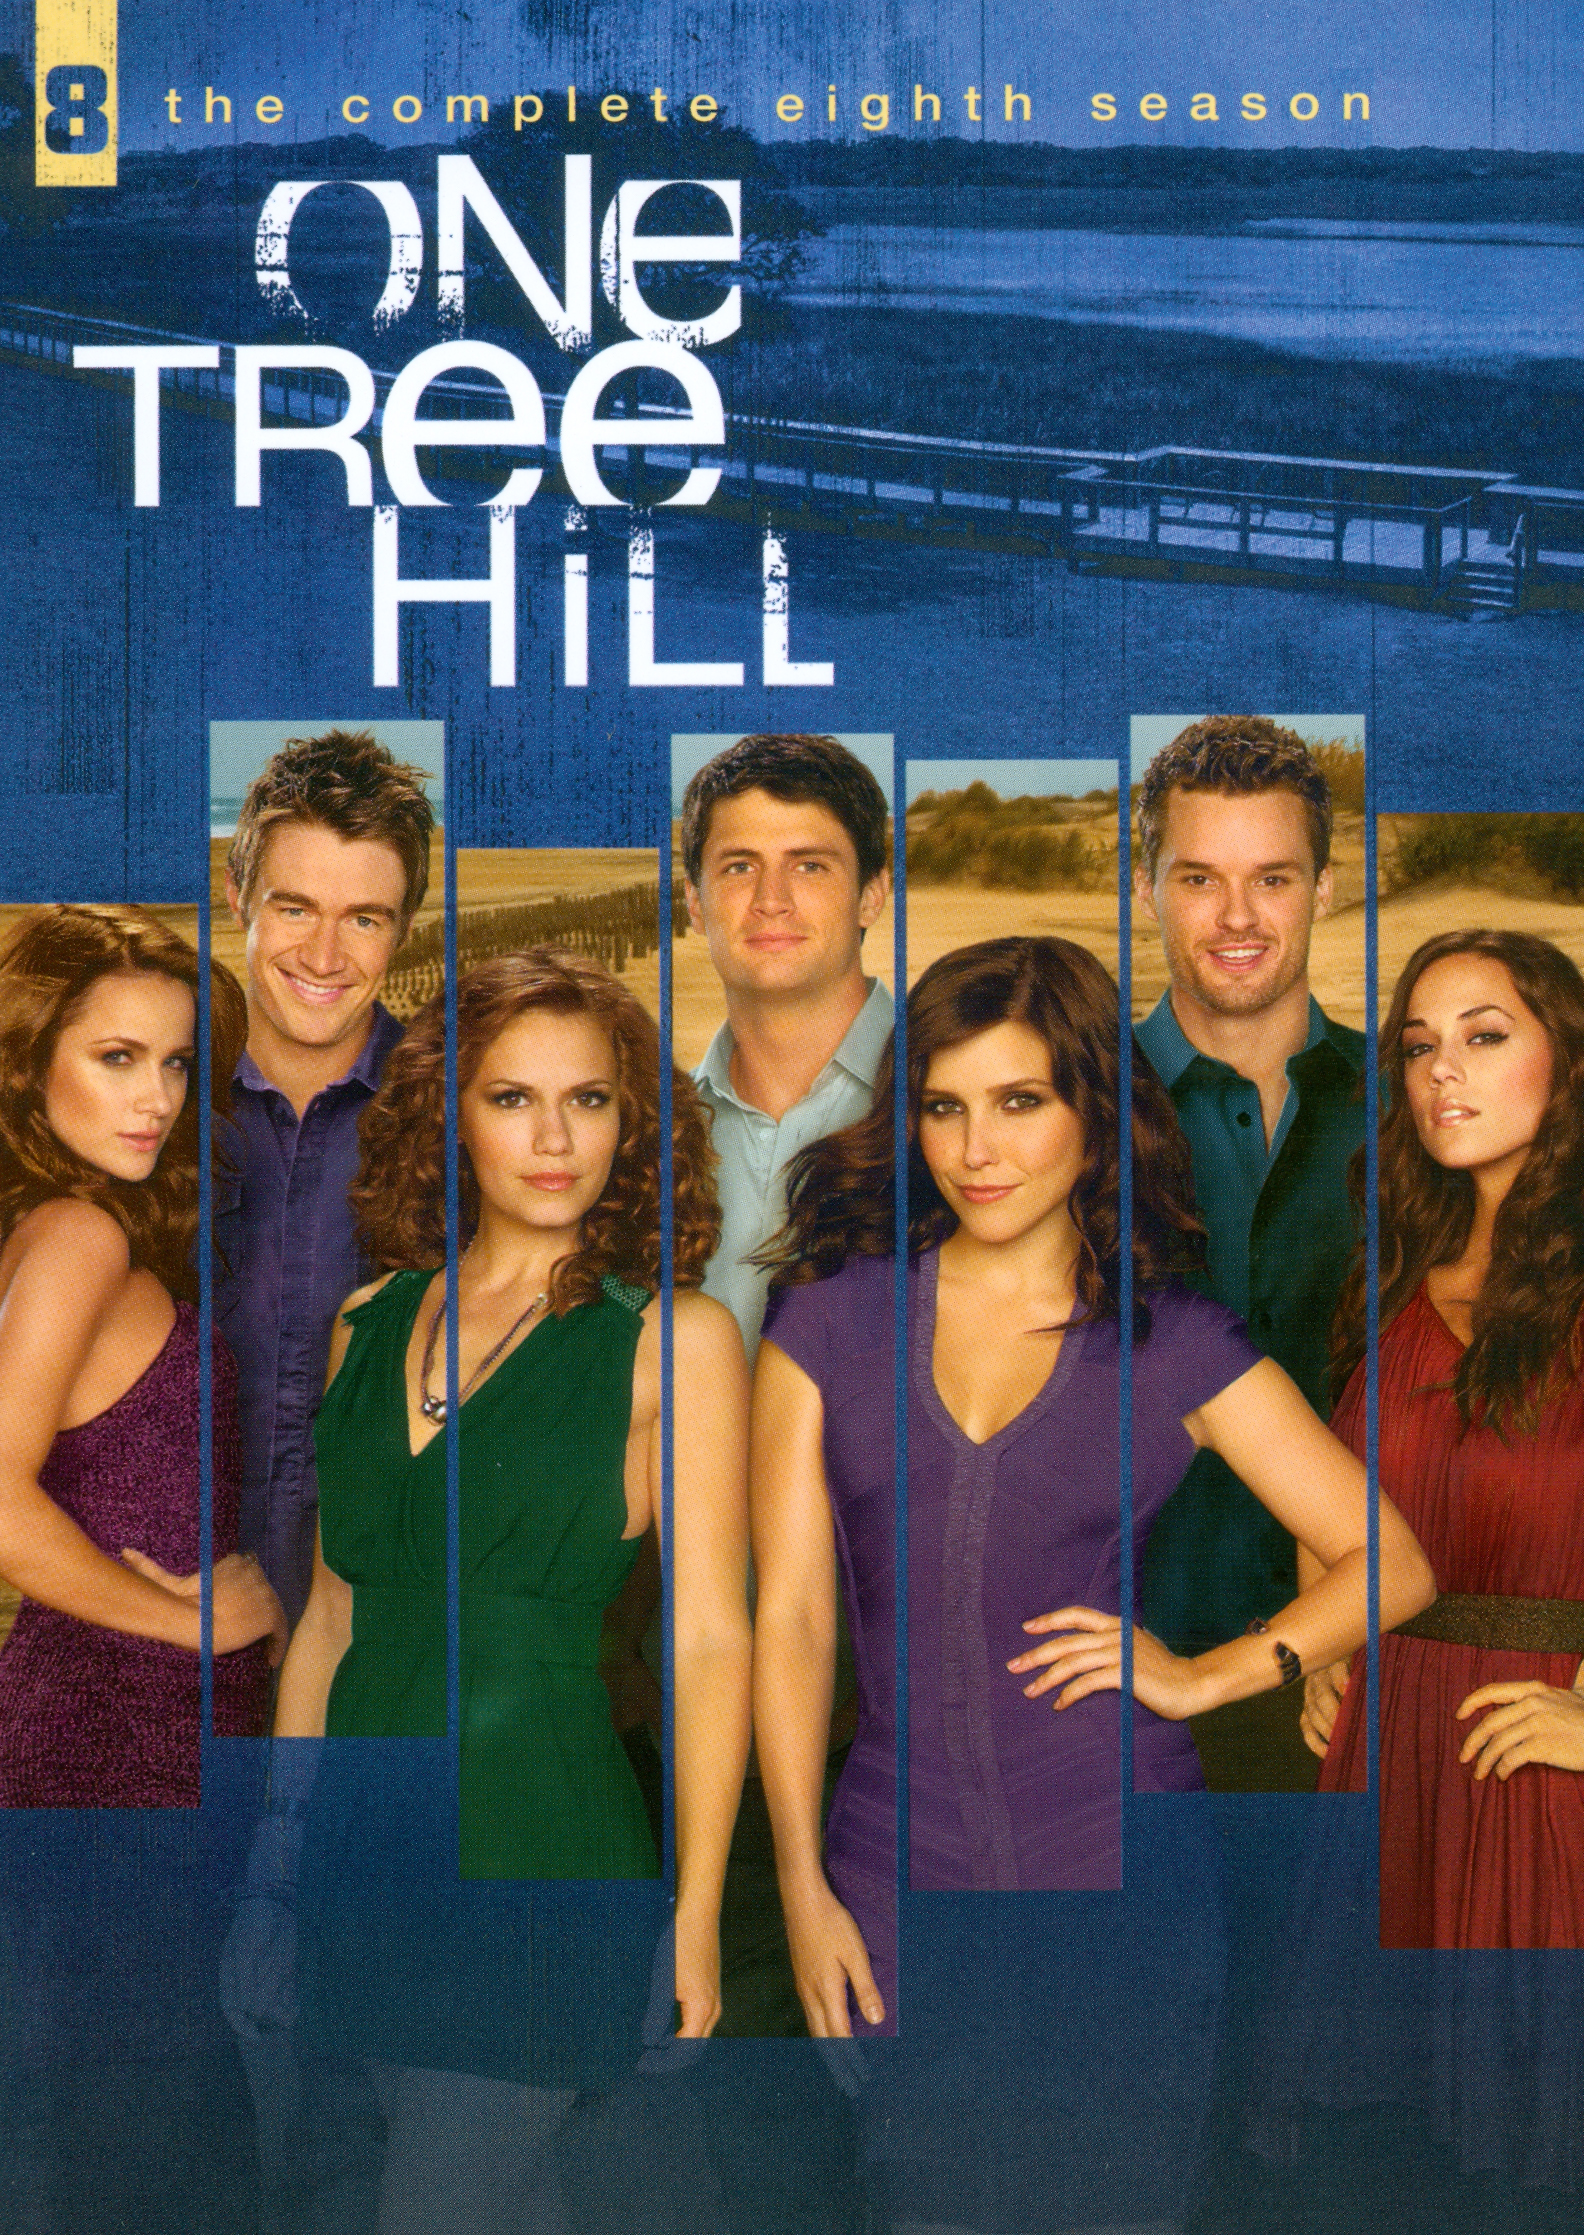 One Tree Hill - The Complete Fifth Season (DVD, 2009, 5-Disc Set